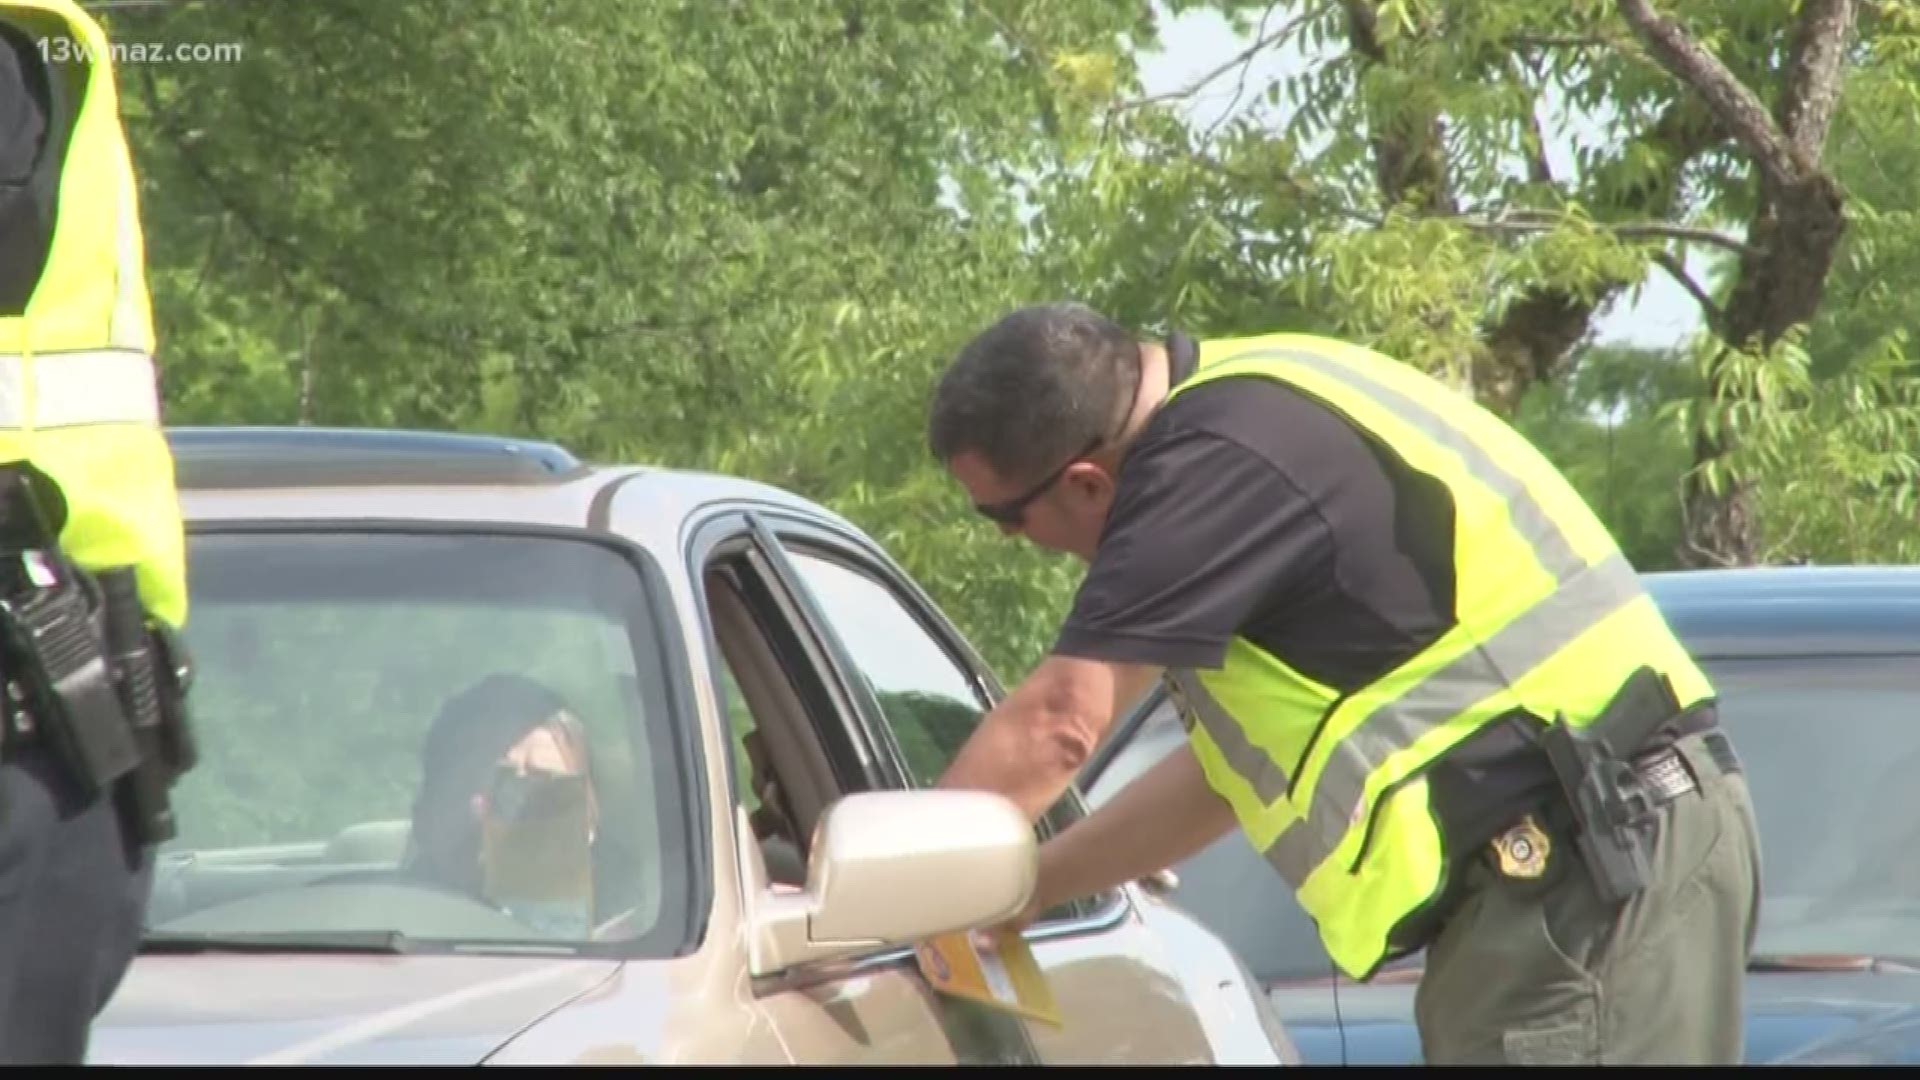 The Governor's Office of Highway Safety has law enforcement agencies kicking up the H.E.A.T. this summer. Agencies around the state will increase their visibility during the summer months to combat traffic deaths and injuries.